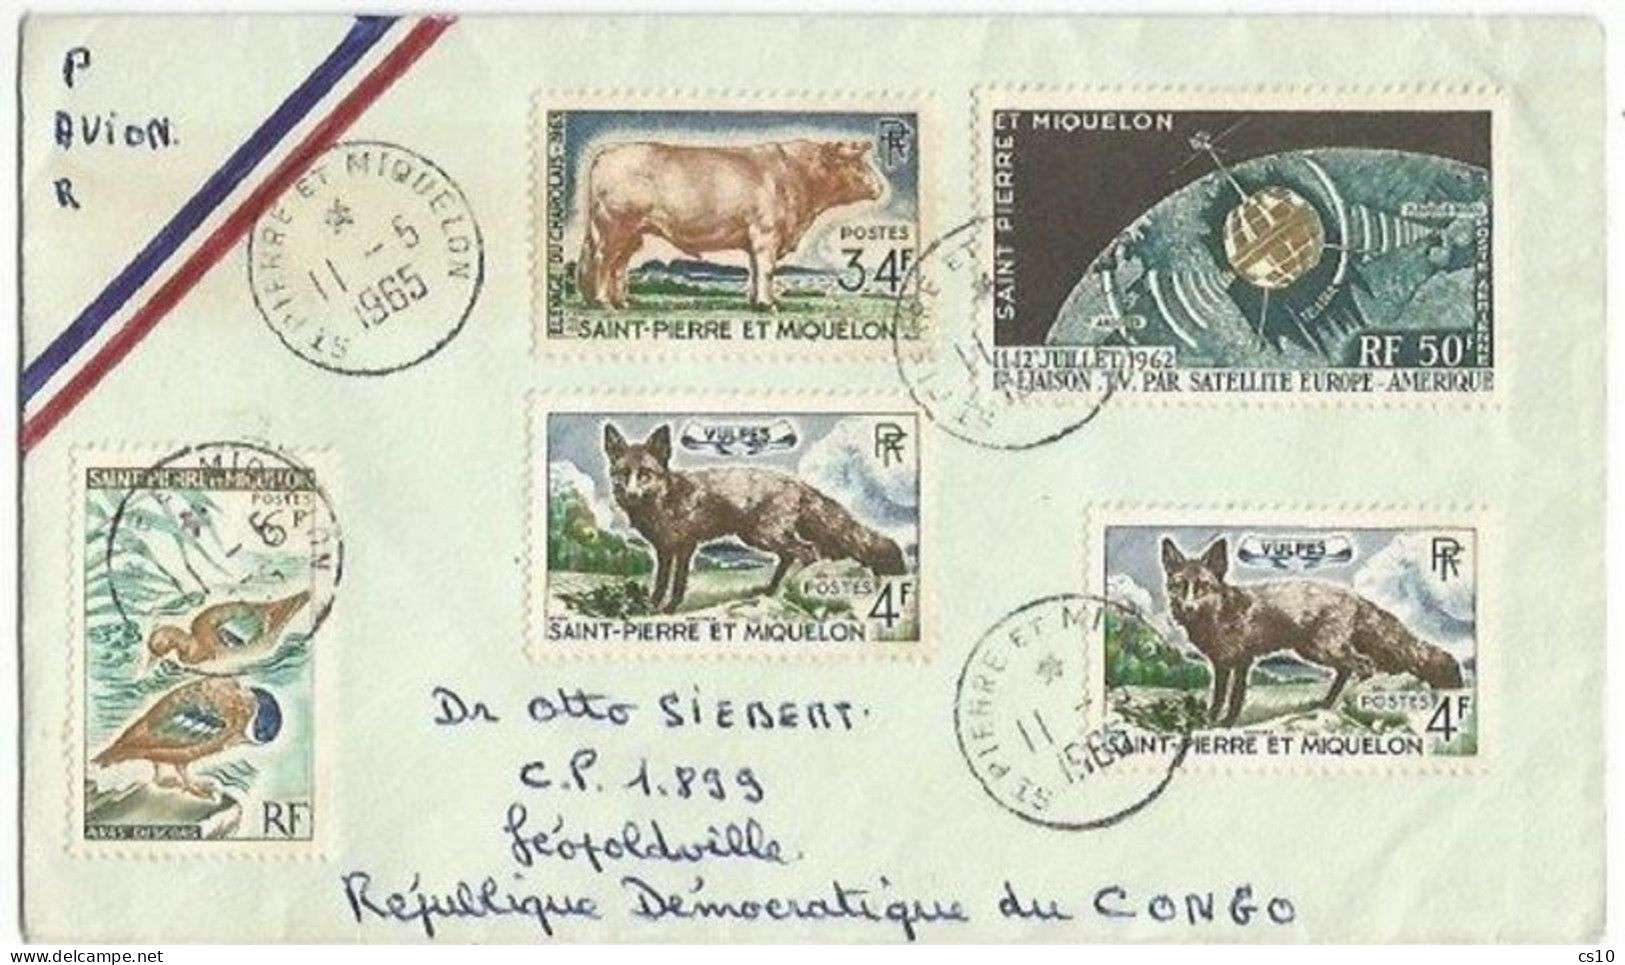 SCARCE! St.Pierre Miquelon AirmailCV 11may1965 With 5 Stamps Rate 98F DIRECTED TO CONGO Not France Or Canada !!!!!! - Nordamerika